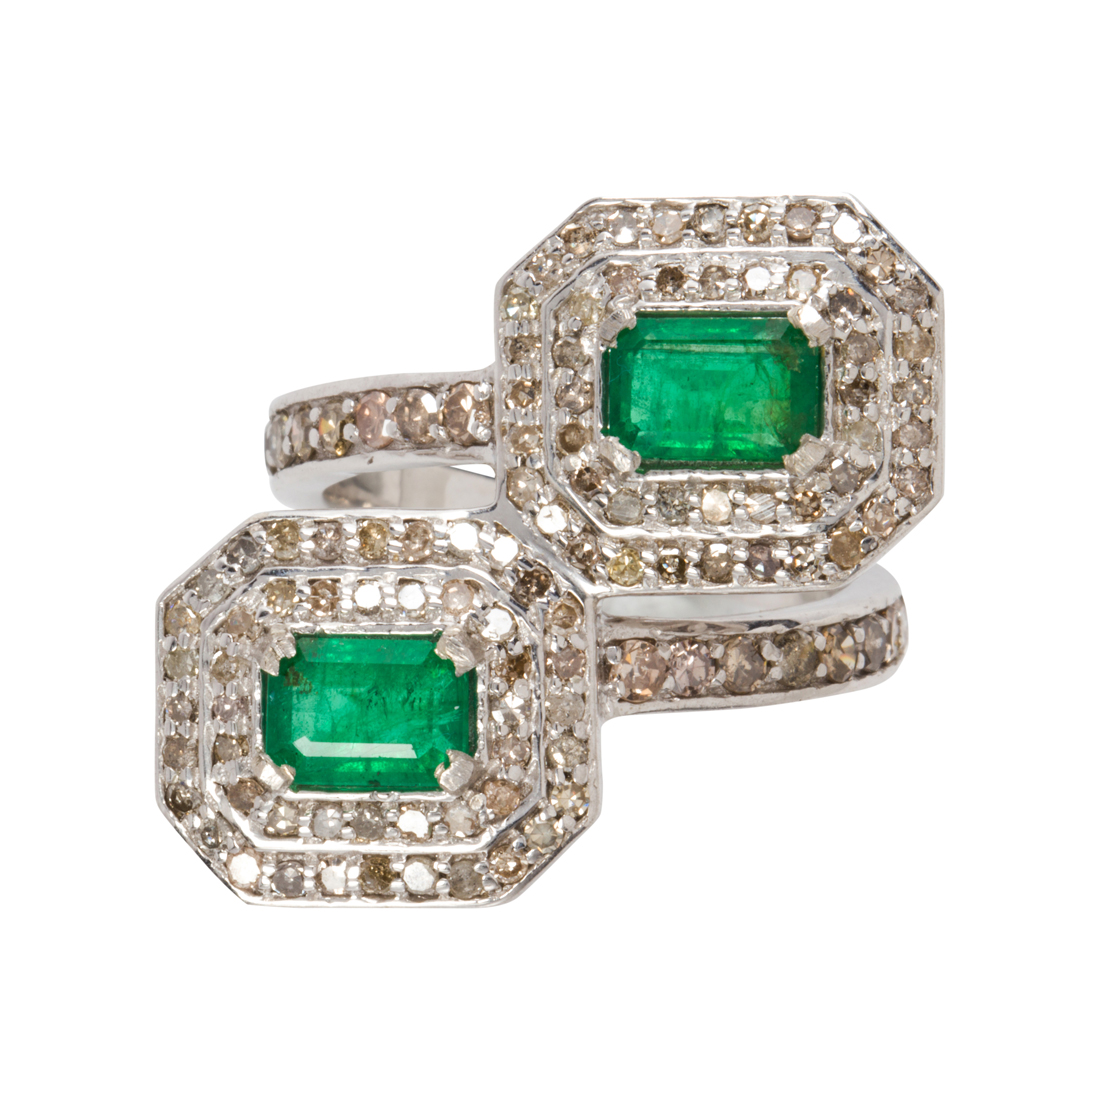 AN EMERALD DIAMOND AND STERLING 3cde8f